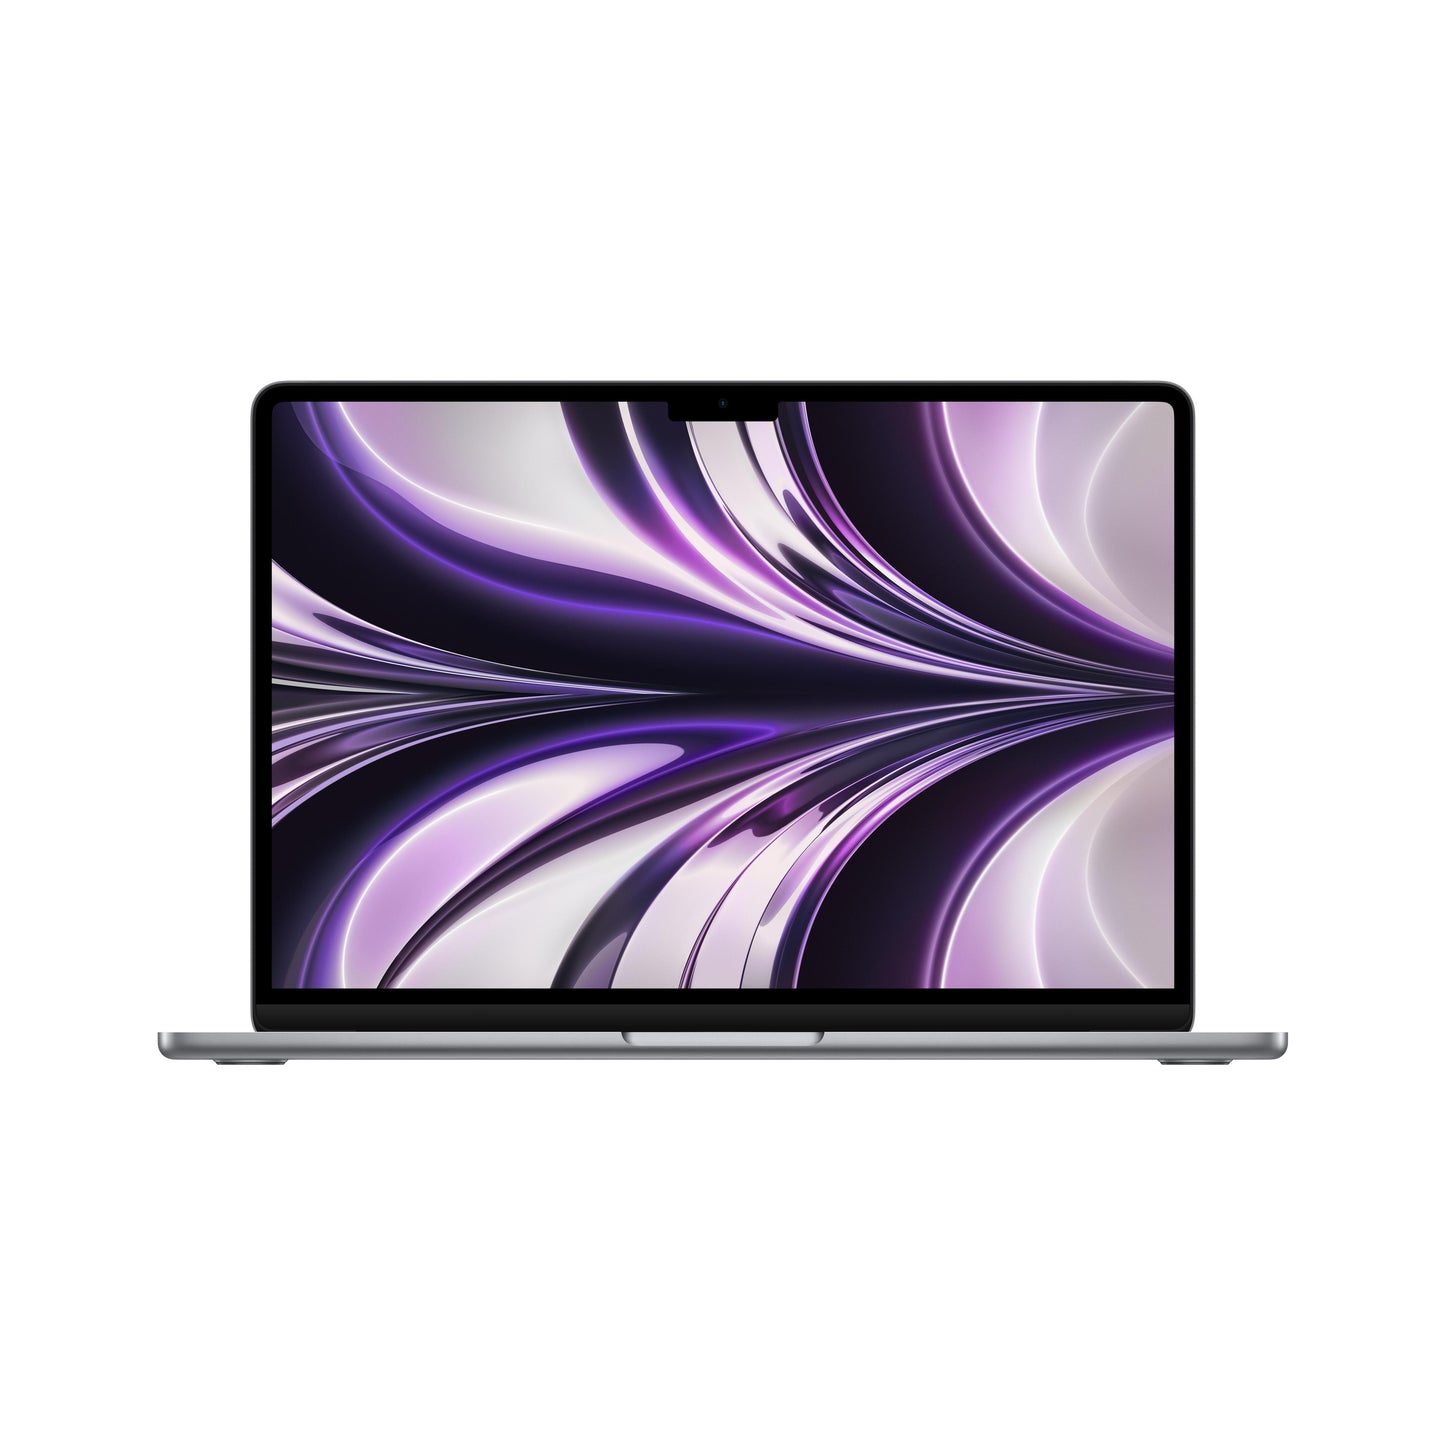 13-inch MacBook Air: Apple M2 chip with 8‑core CPU and 10‑core GPU, 512GB SSD - Space Grey